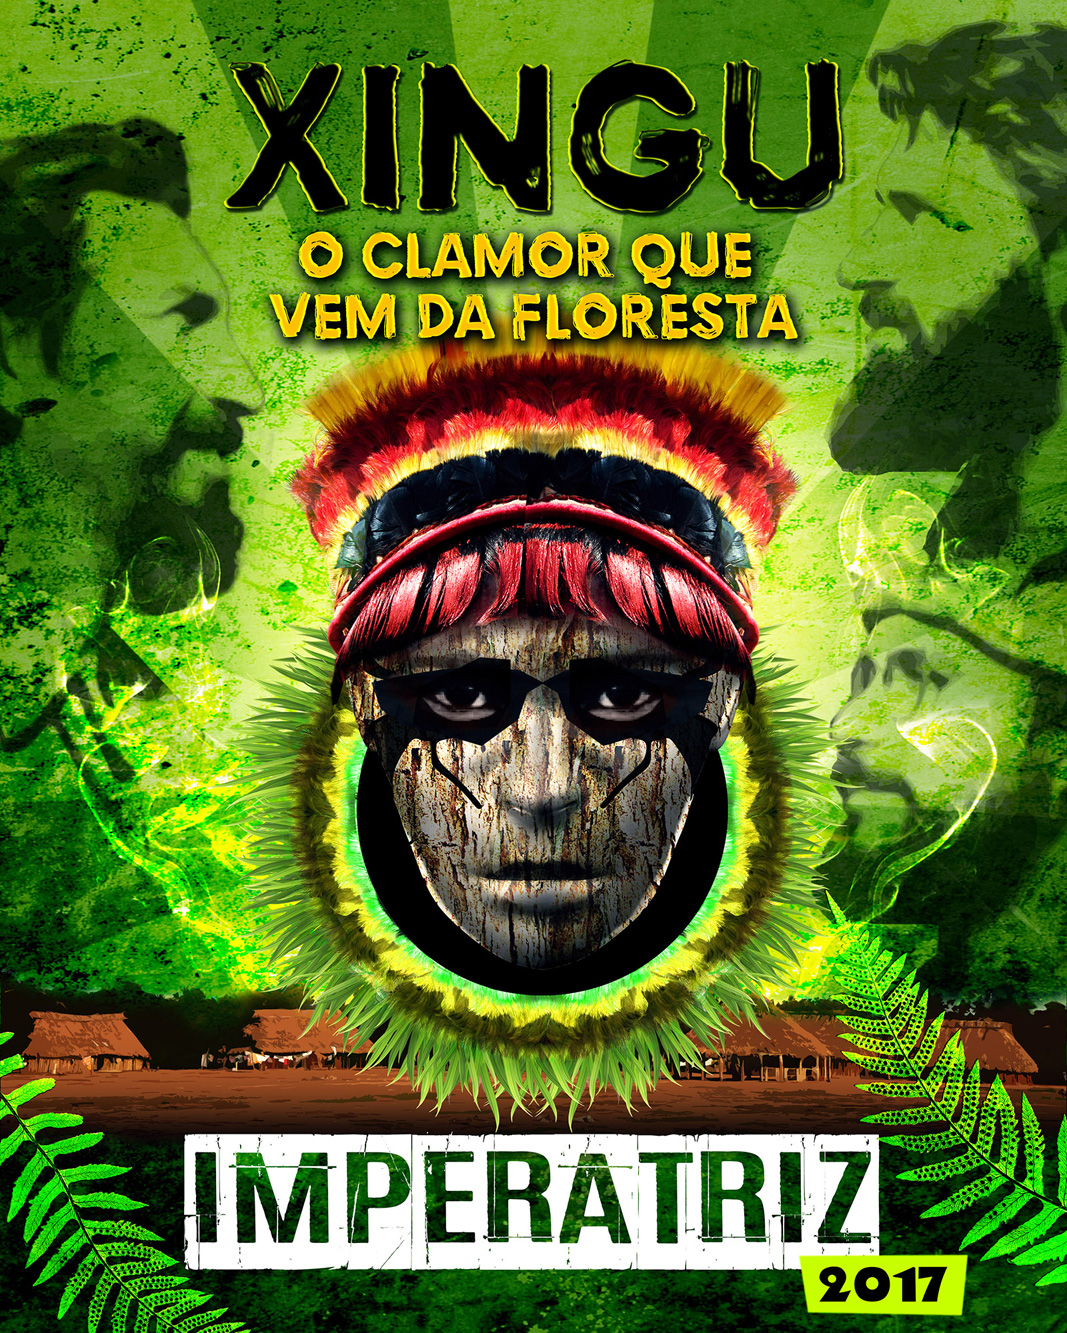 Xingu, the clamor coming from the forest in Rio de Janeiro’s Carnival